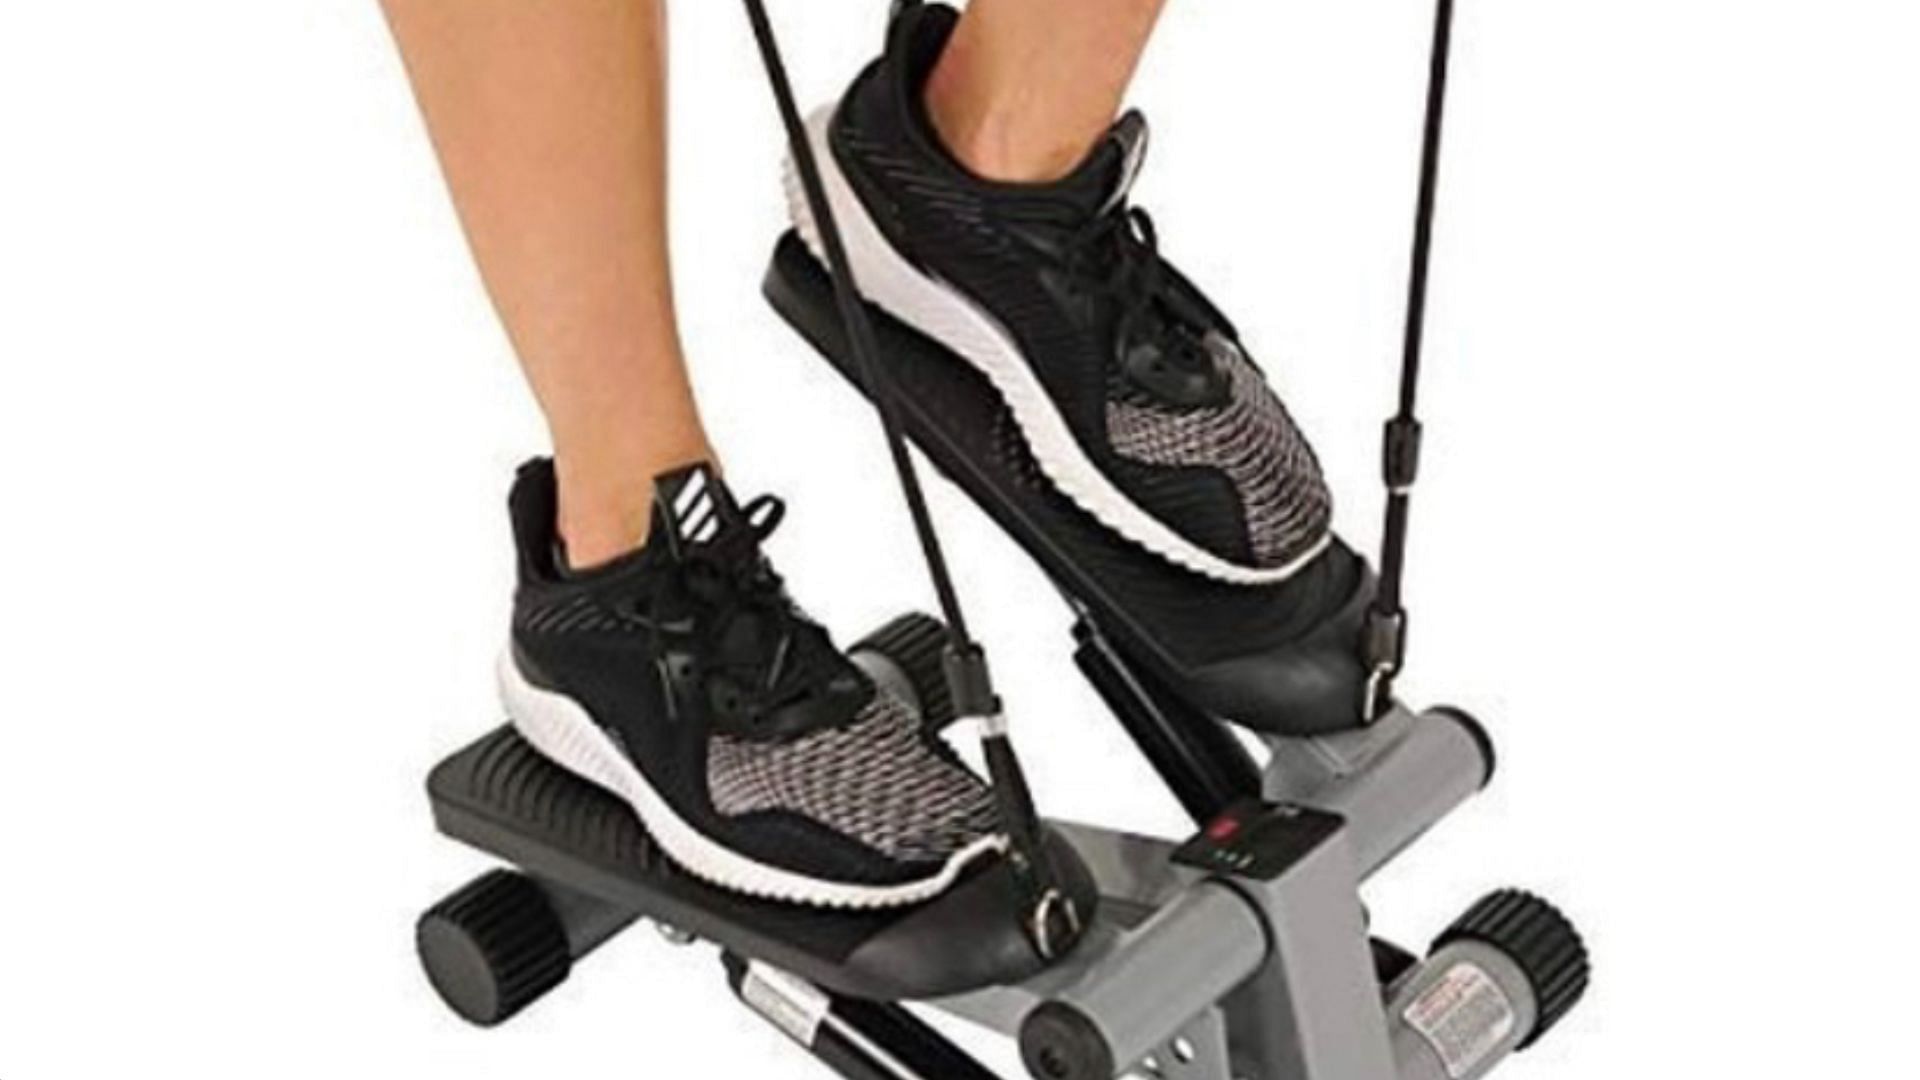 Mini stepper workout offers several benefits. (Photo via Instagram/cproducts_com)